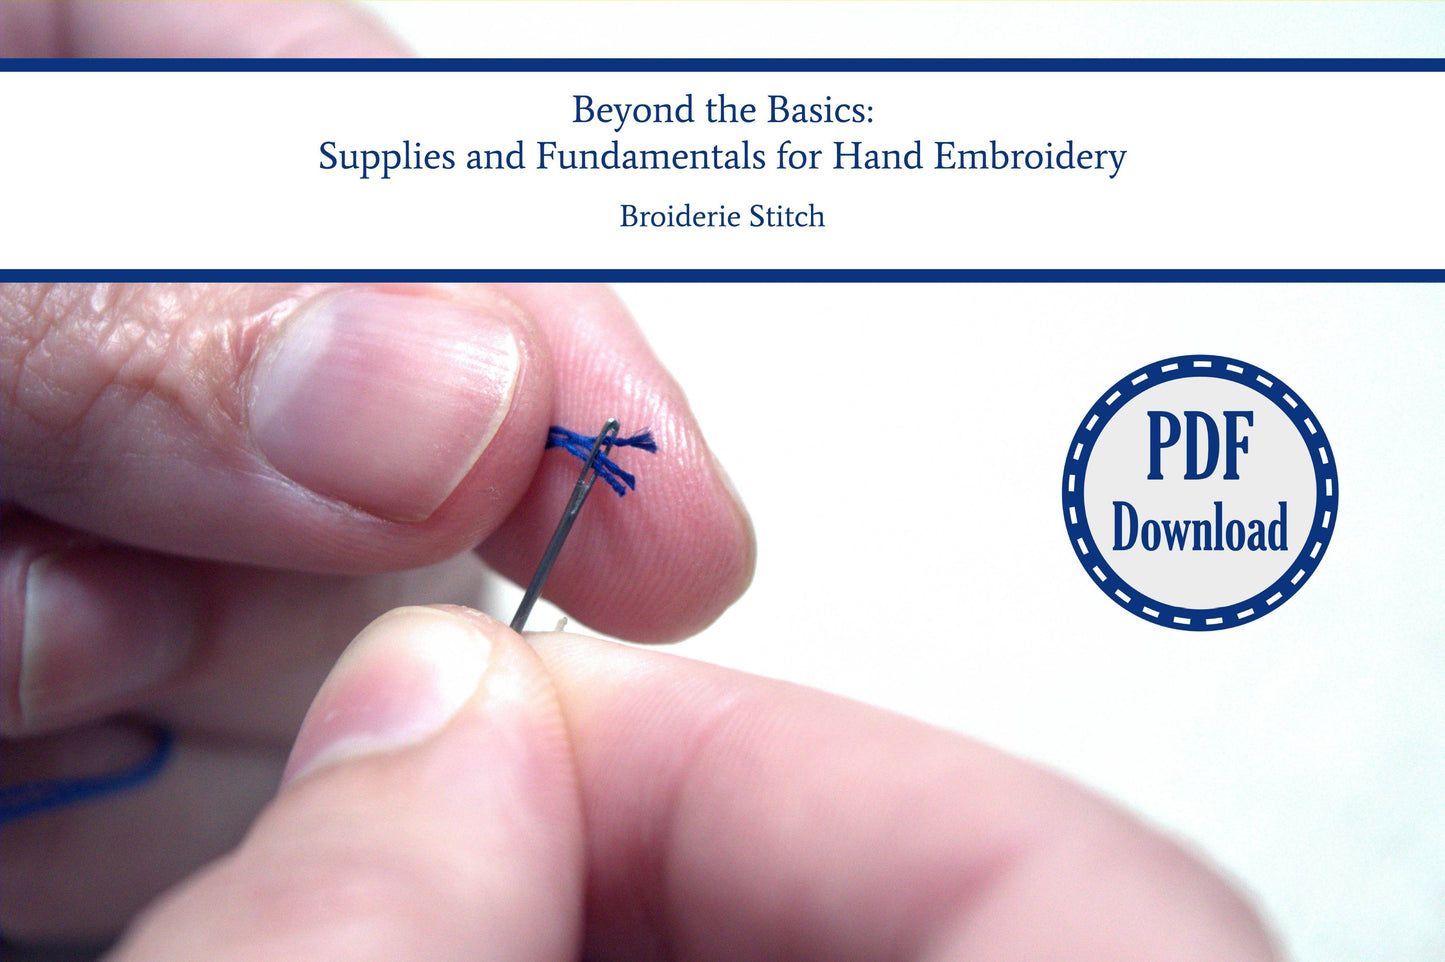 Title - Beyond the Basics: Supplies and Fundamentals for Hand Embroidery by Broiderie Stitch. Hands threading a needle with blue embroidery floss; 'PDF Download' stamp in upper right corner